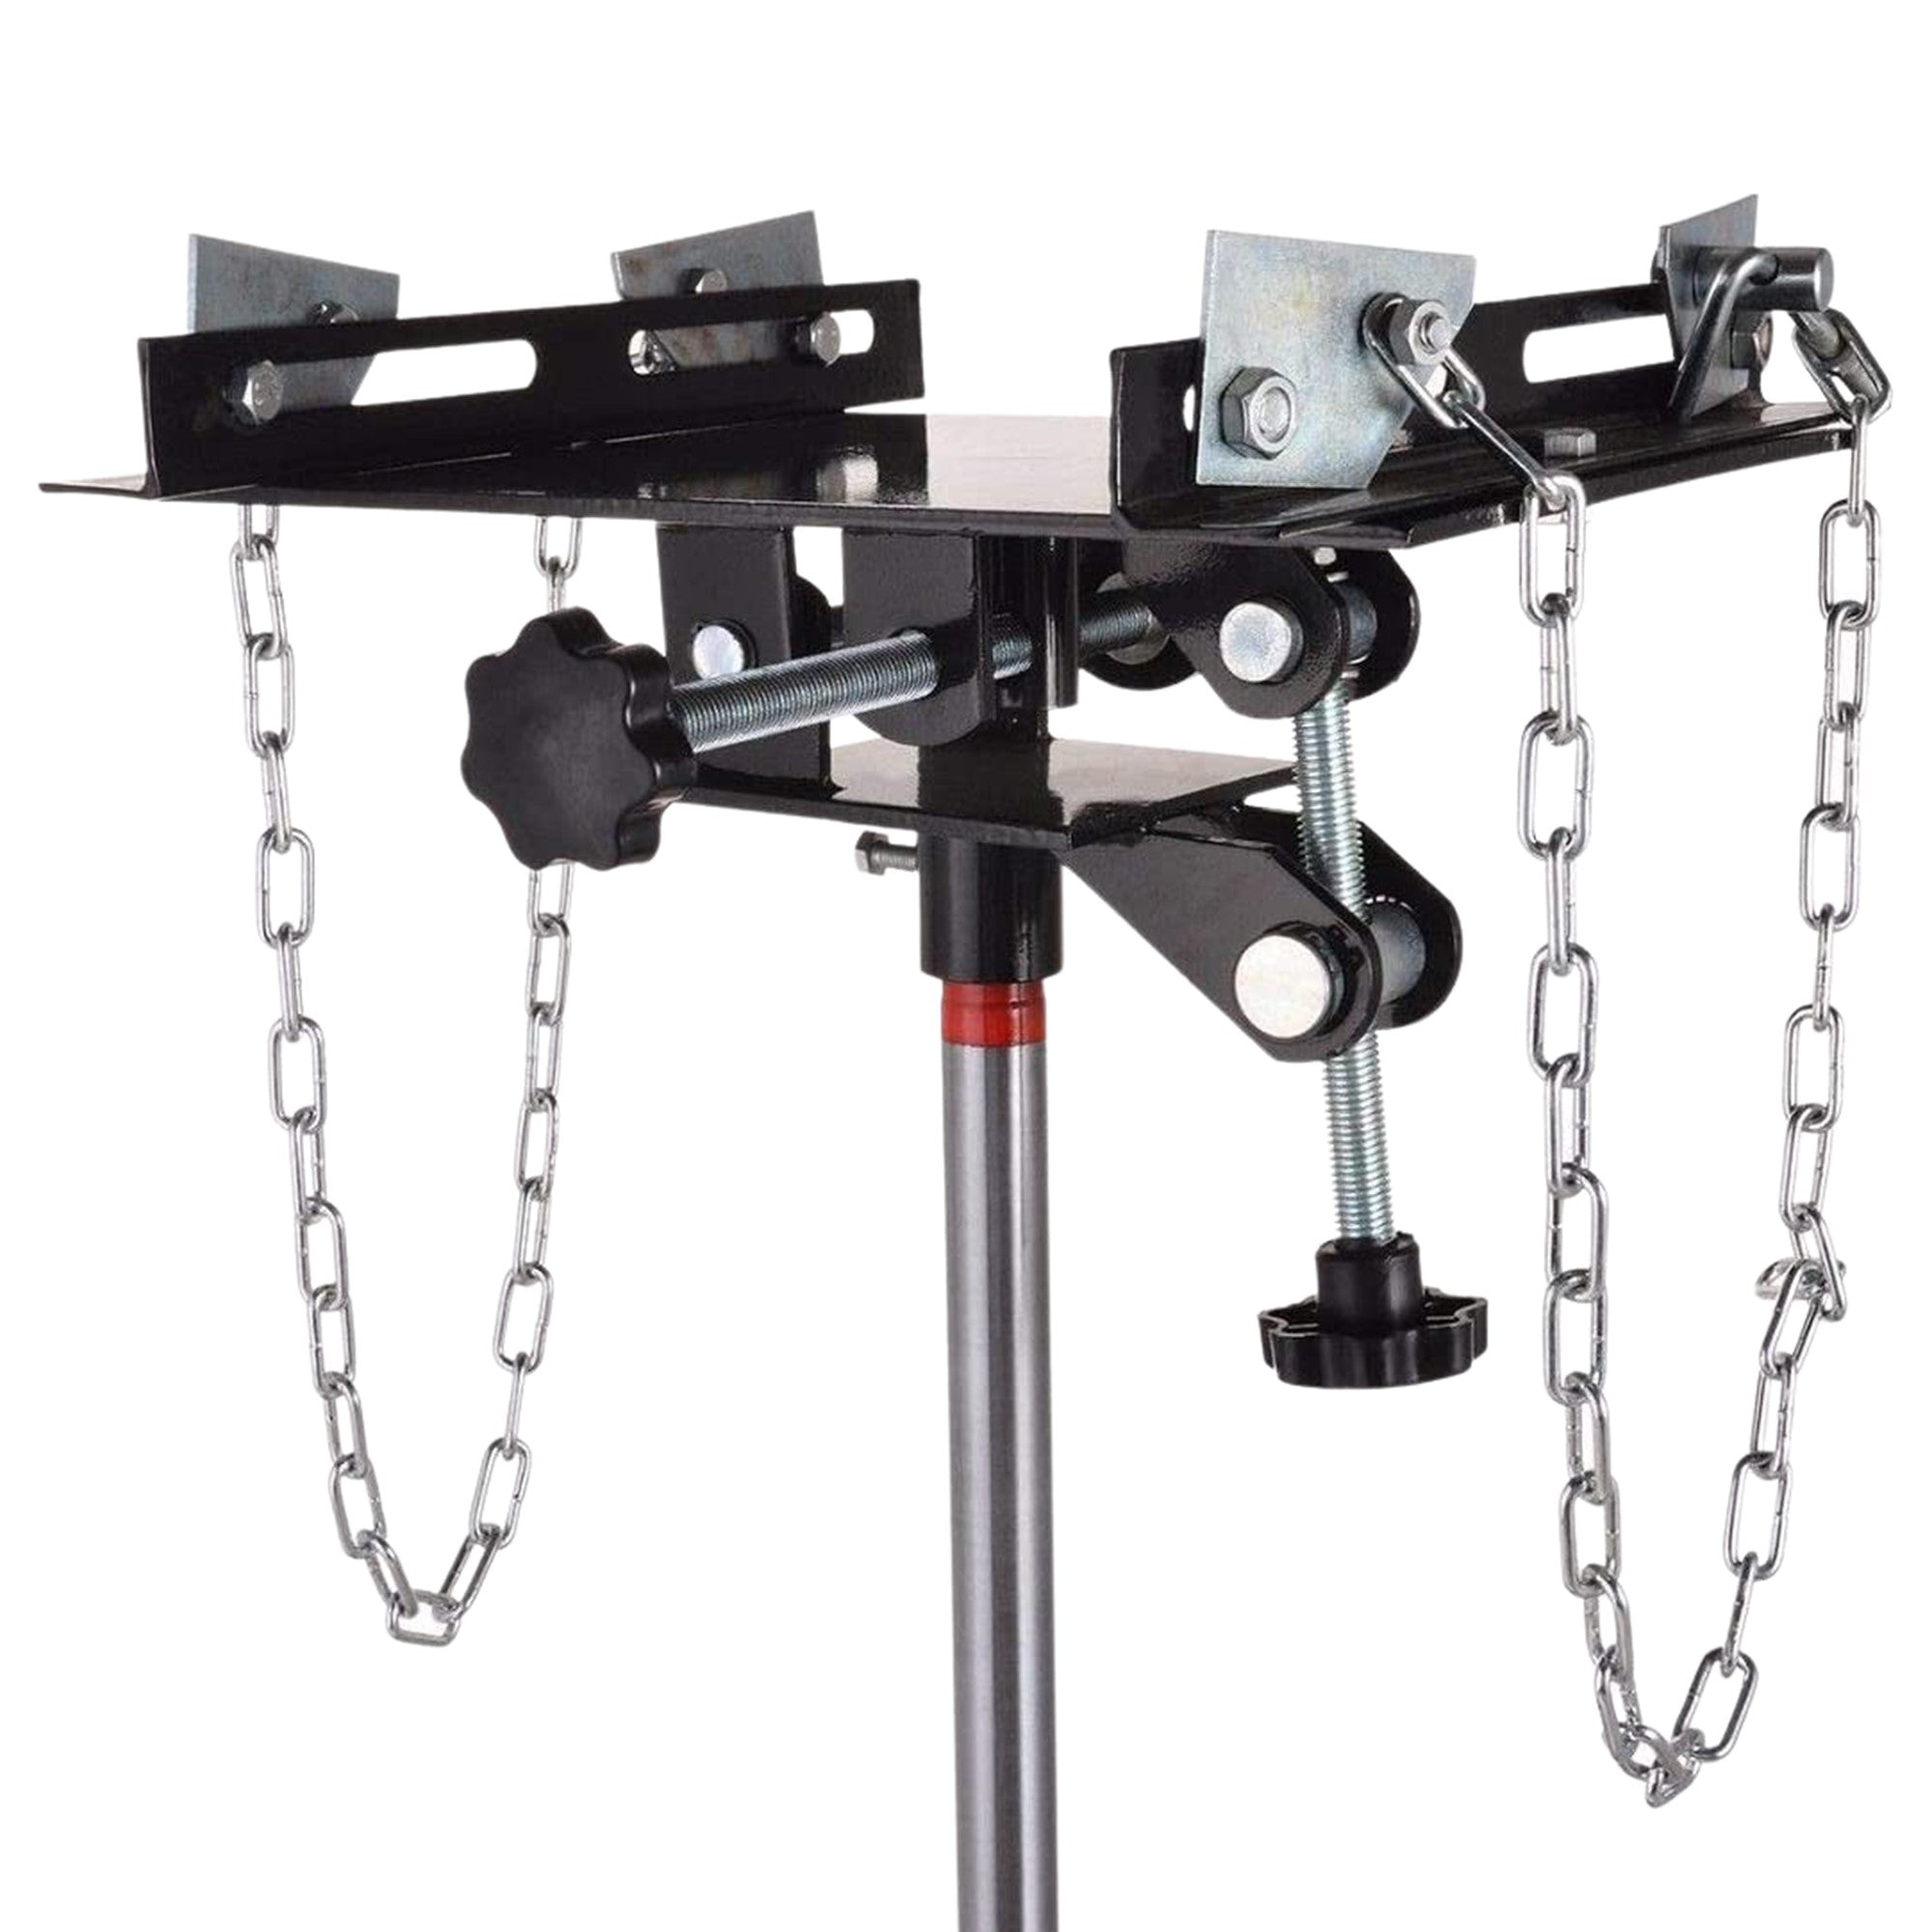 Two 39" long safety chains for securing the transmission on the saddle